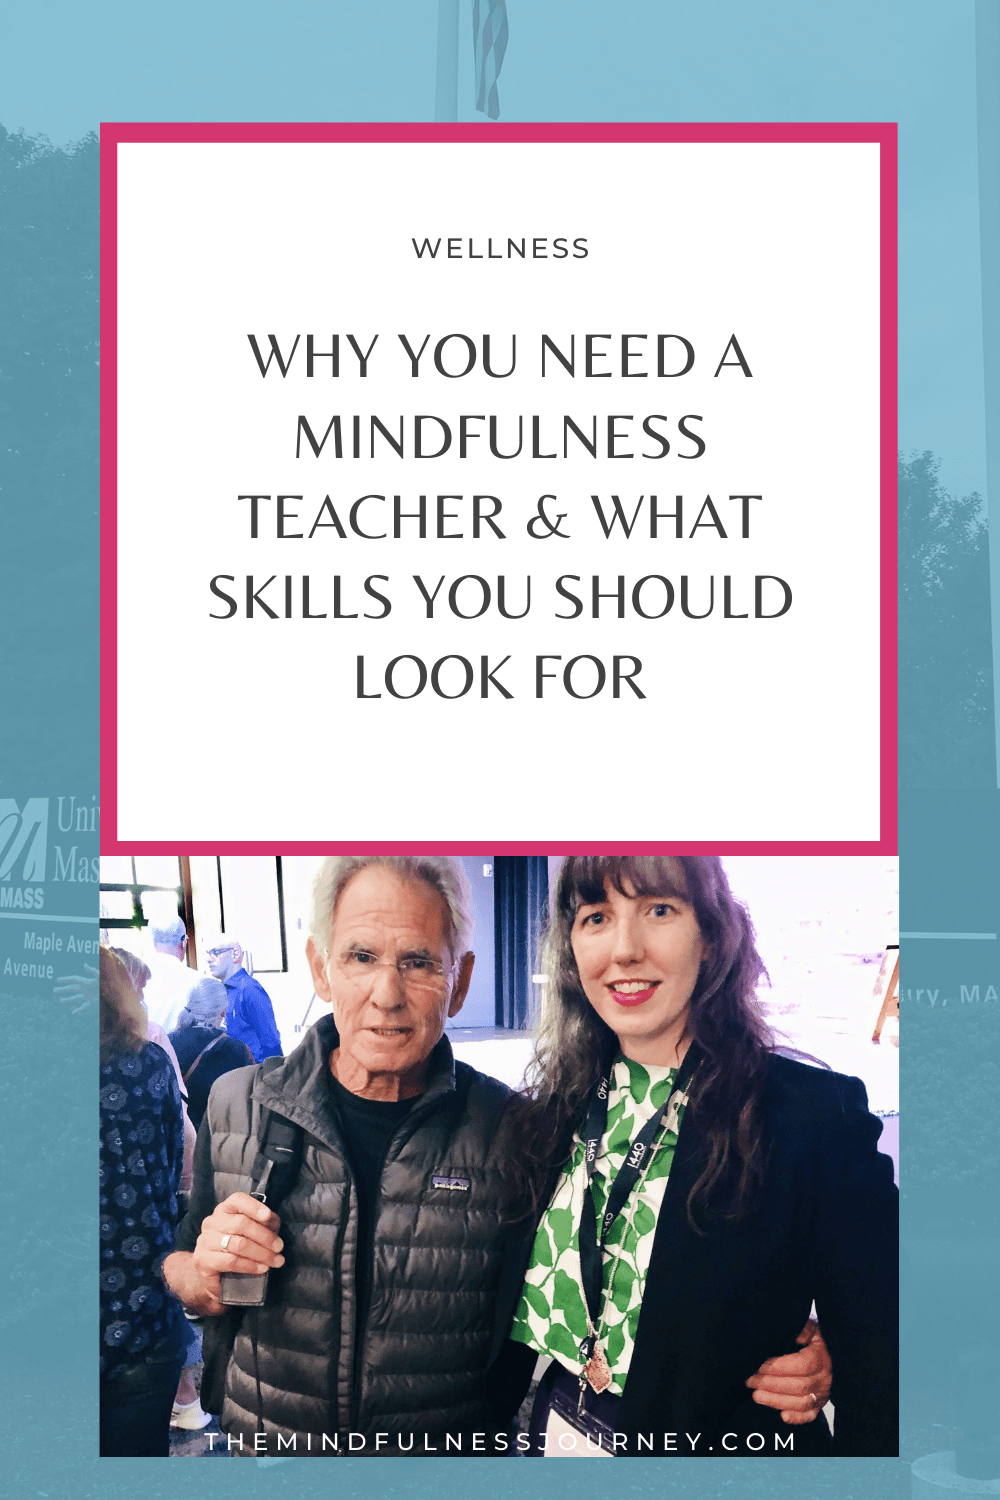 Why You Need a Mindfulness Teacher and What Skills You Should Look For